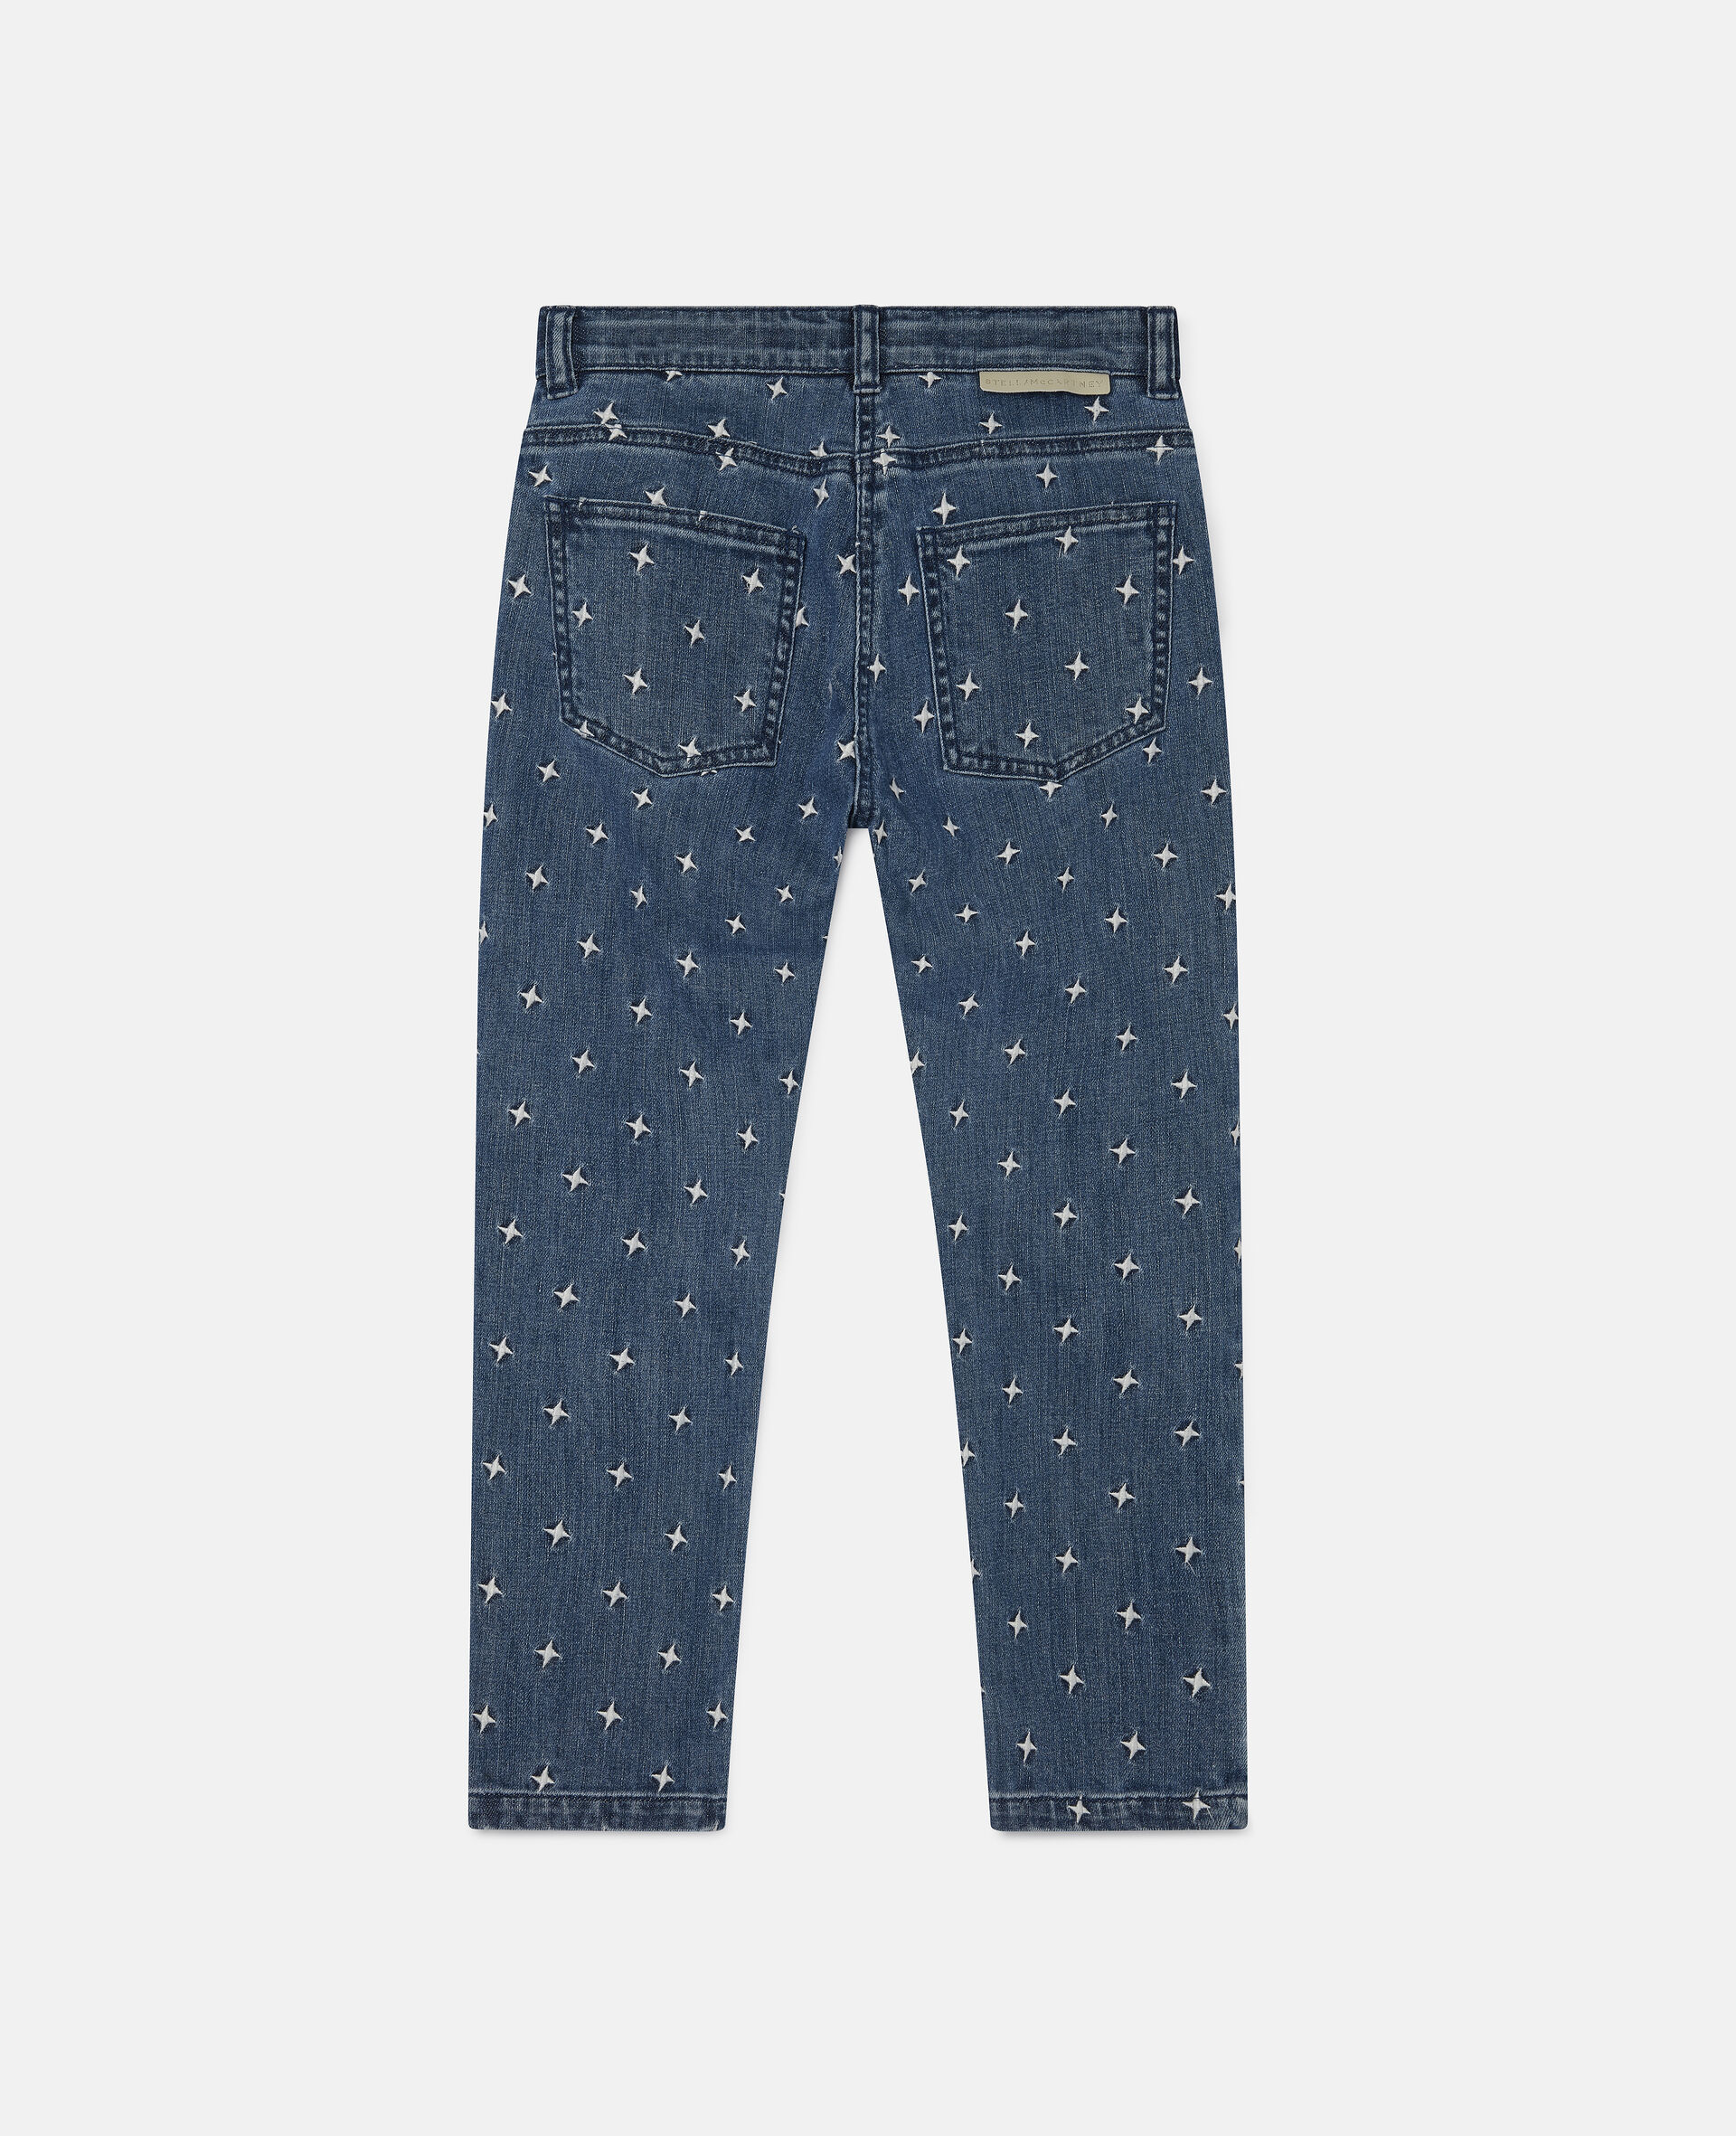 Embroidered Stars Denim Trousers-Blue-large image number 1